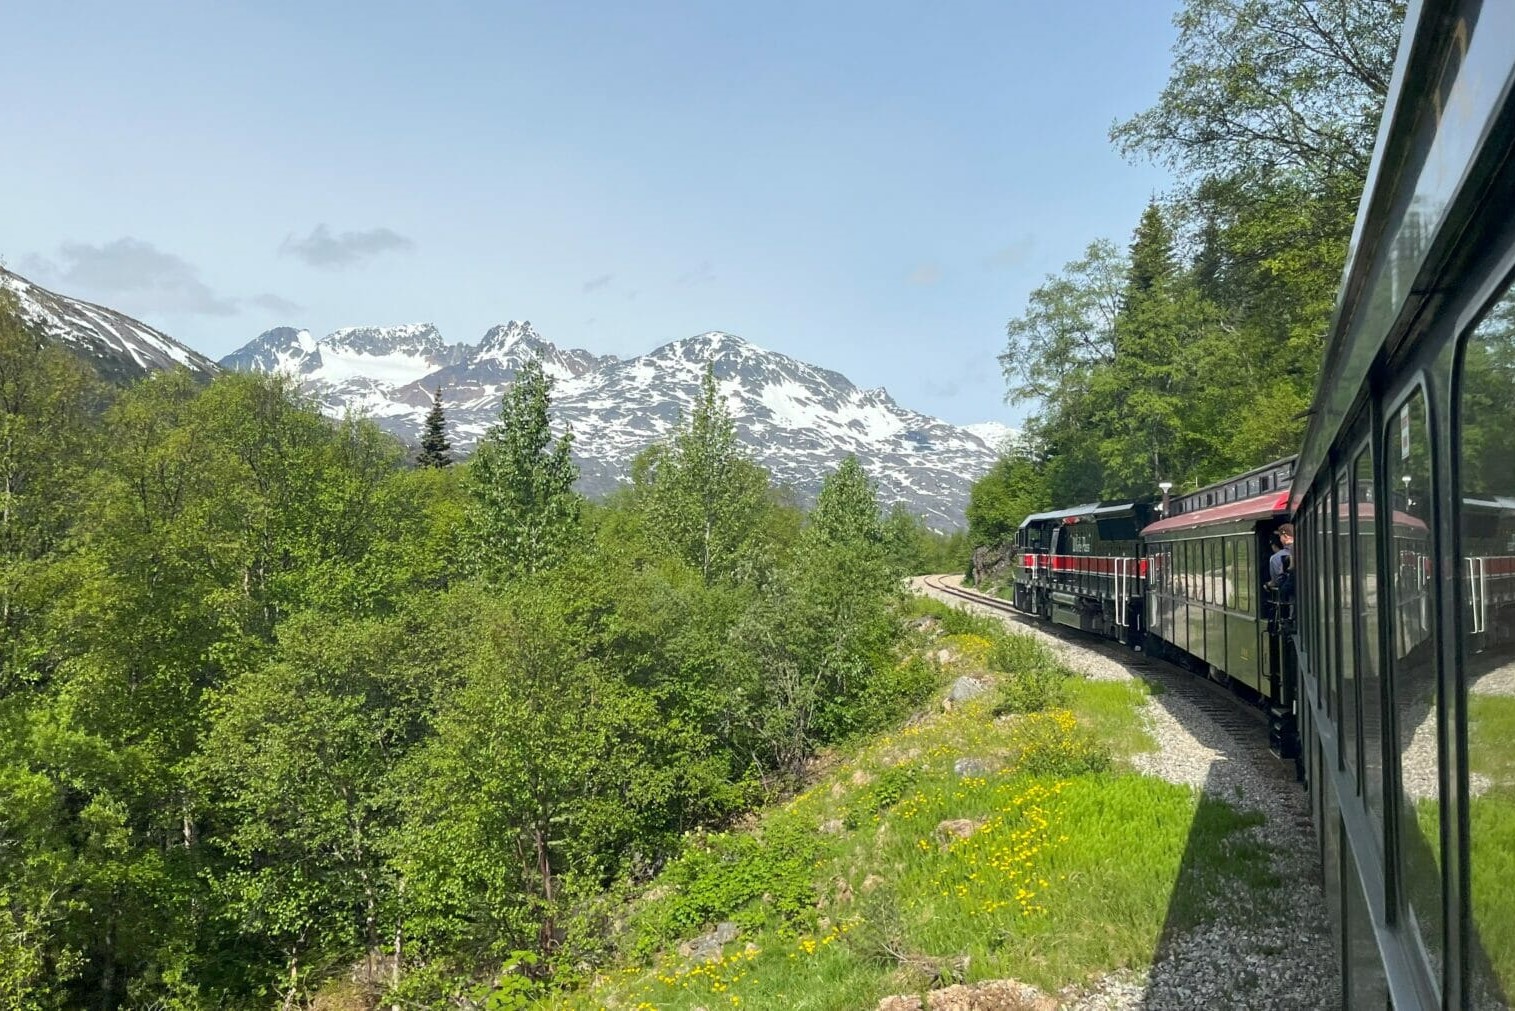 a train heads through trees, with mountains in the background